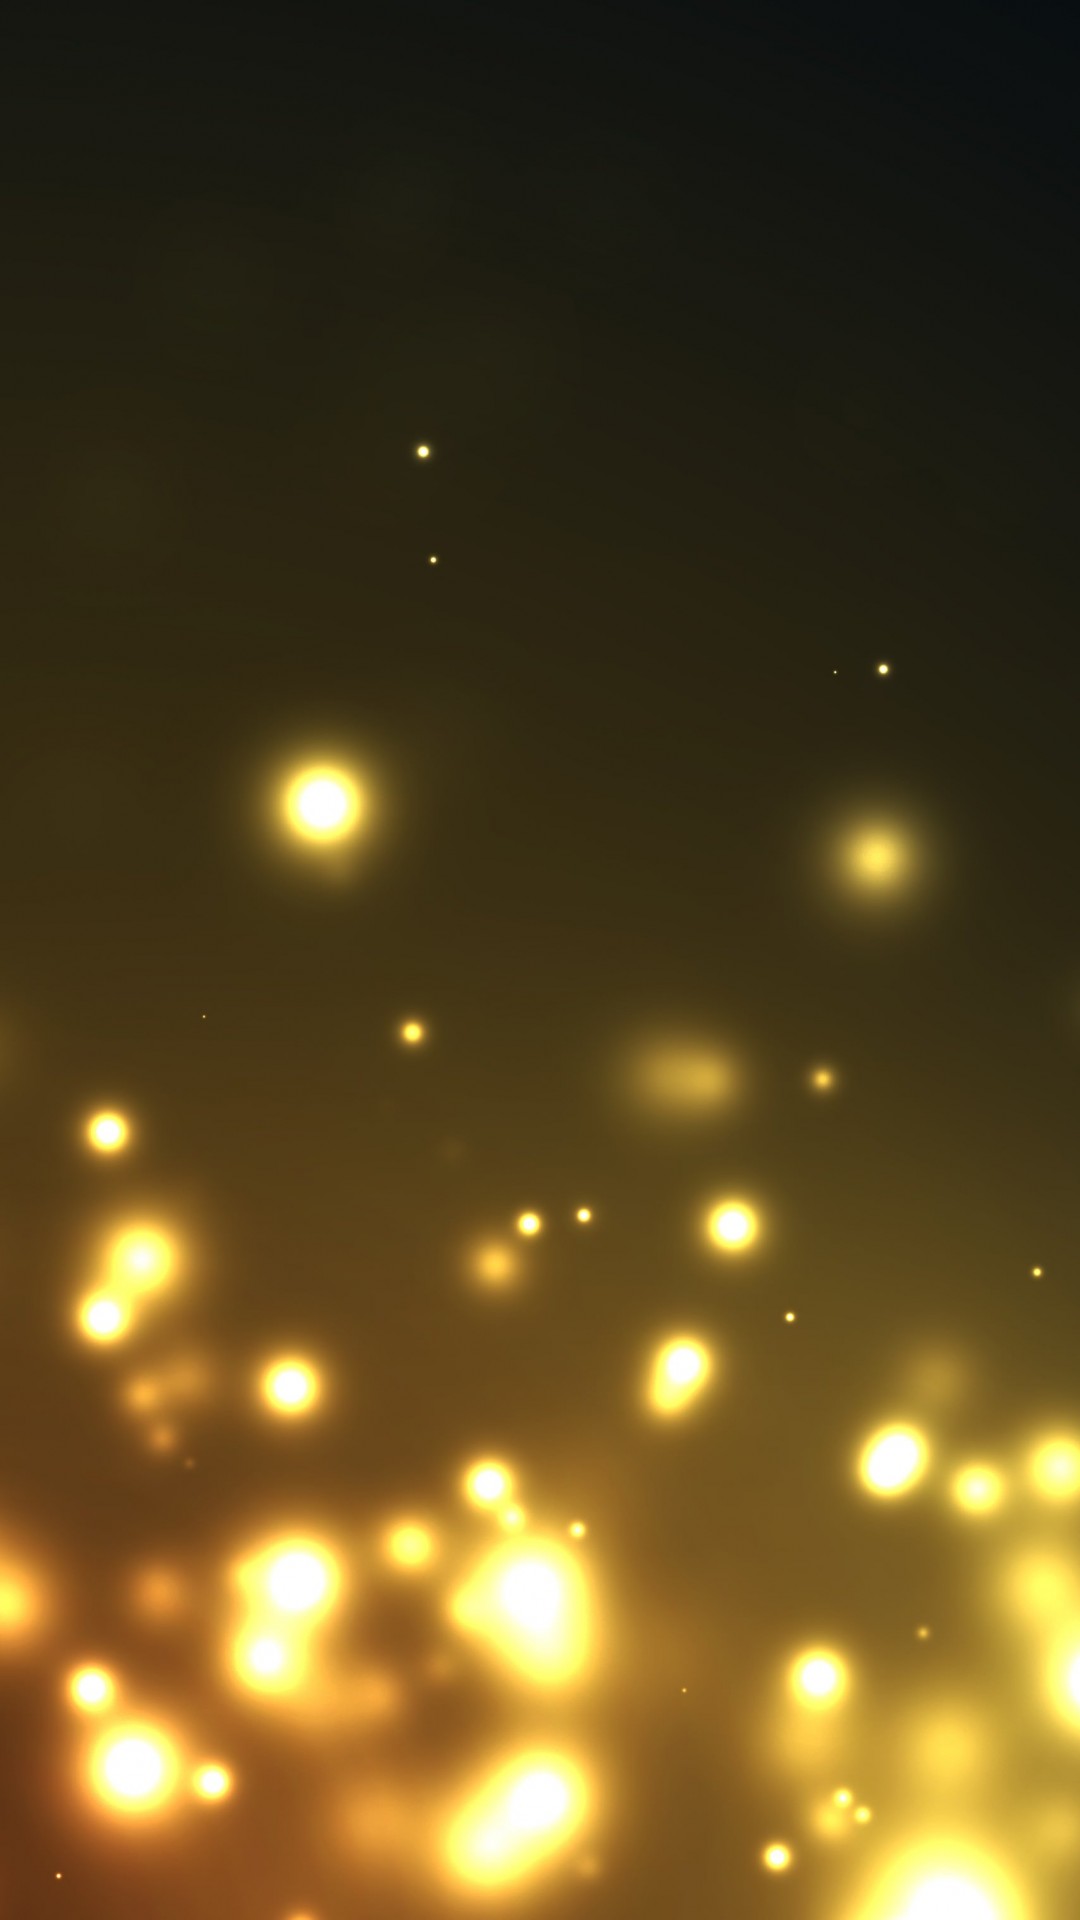 Floating Particles Wallpaper for Google Nexus 5